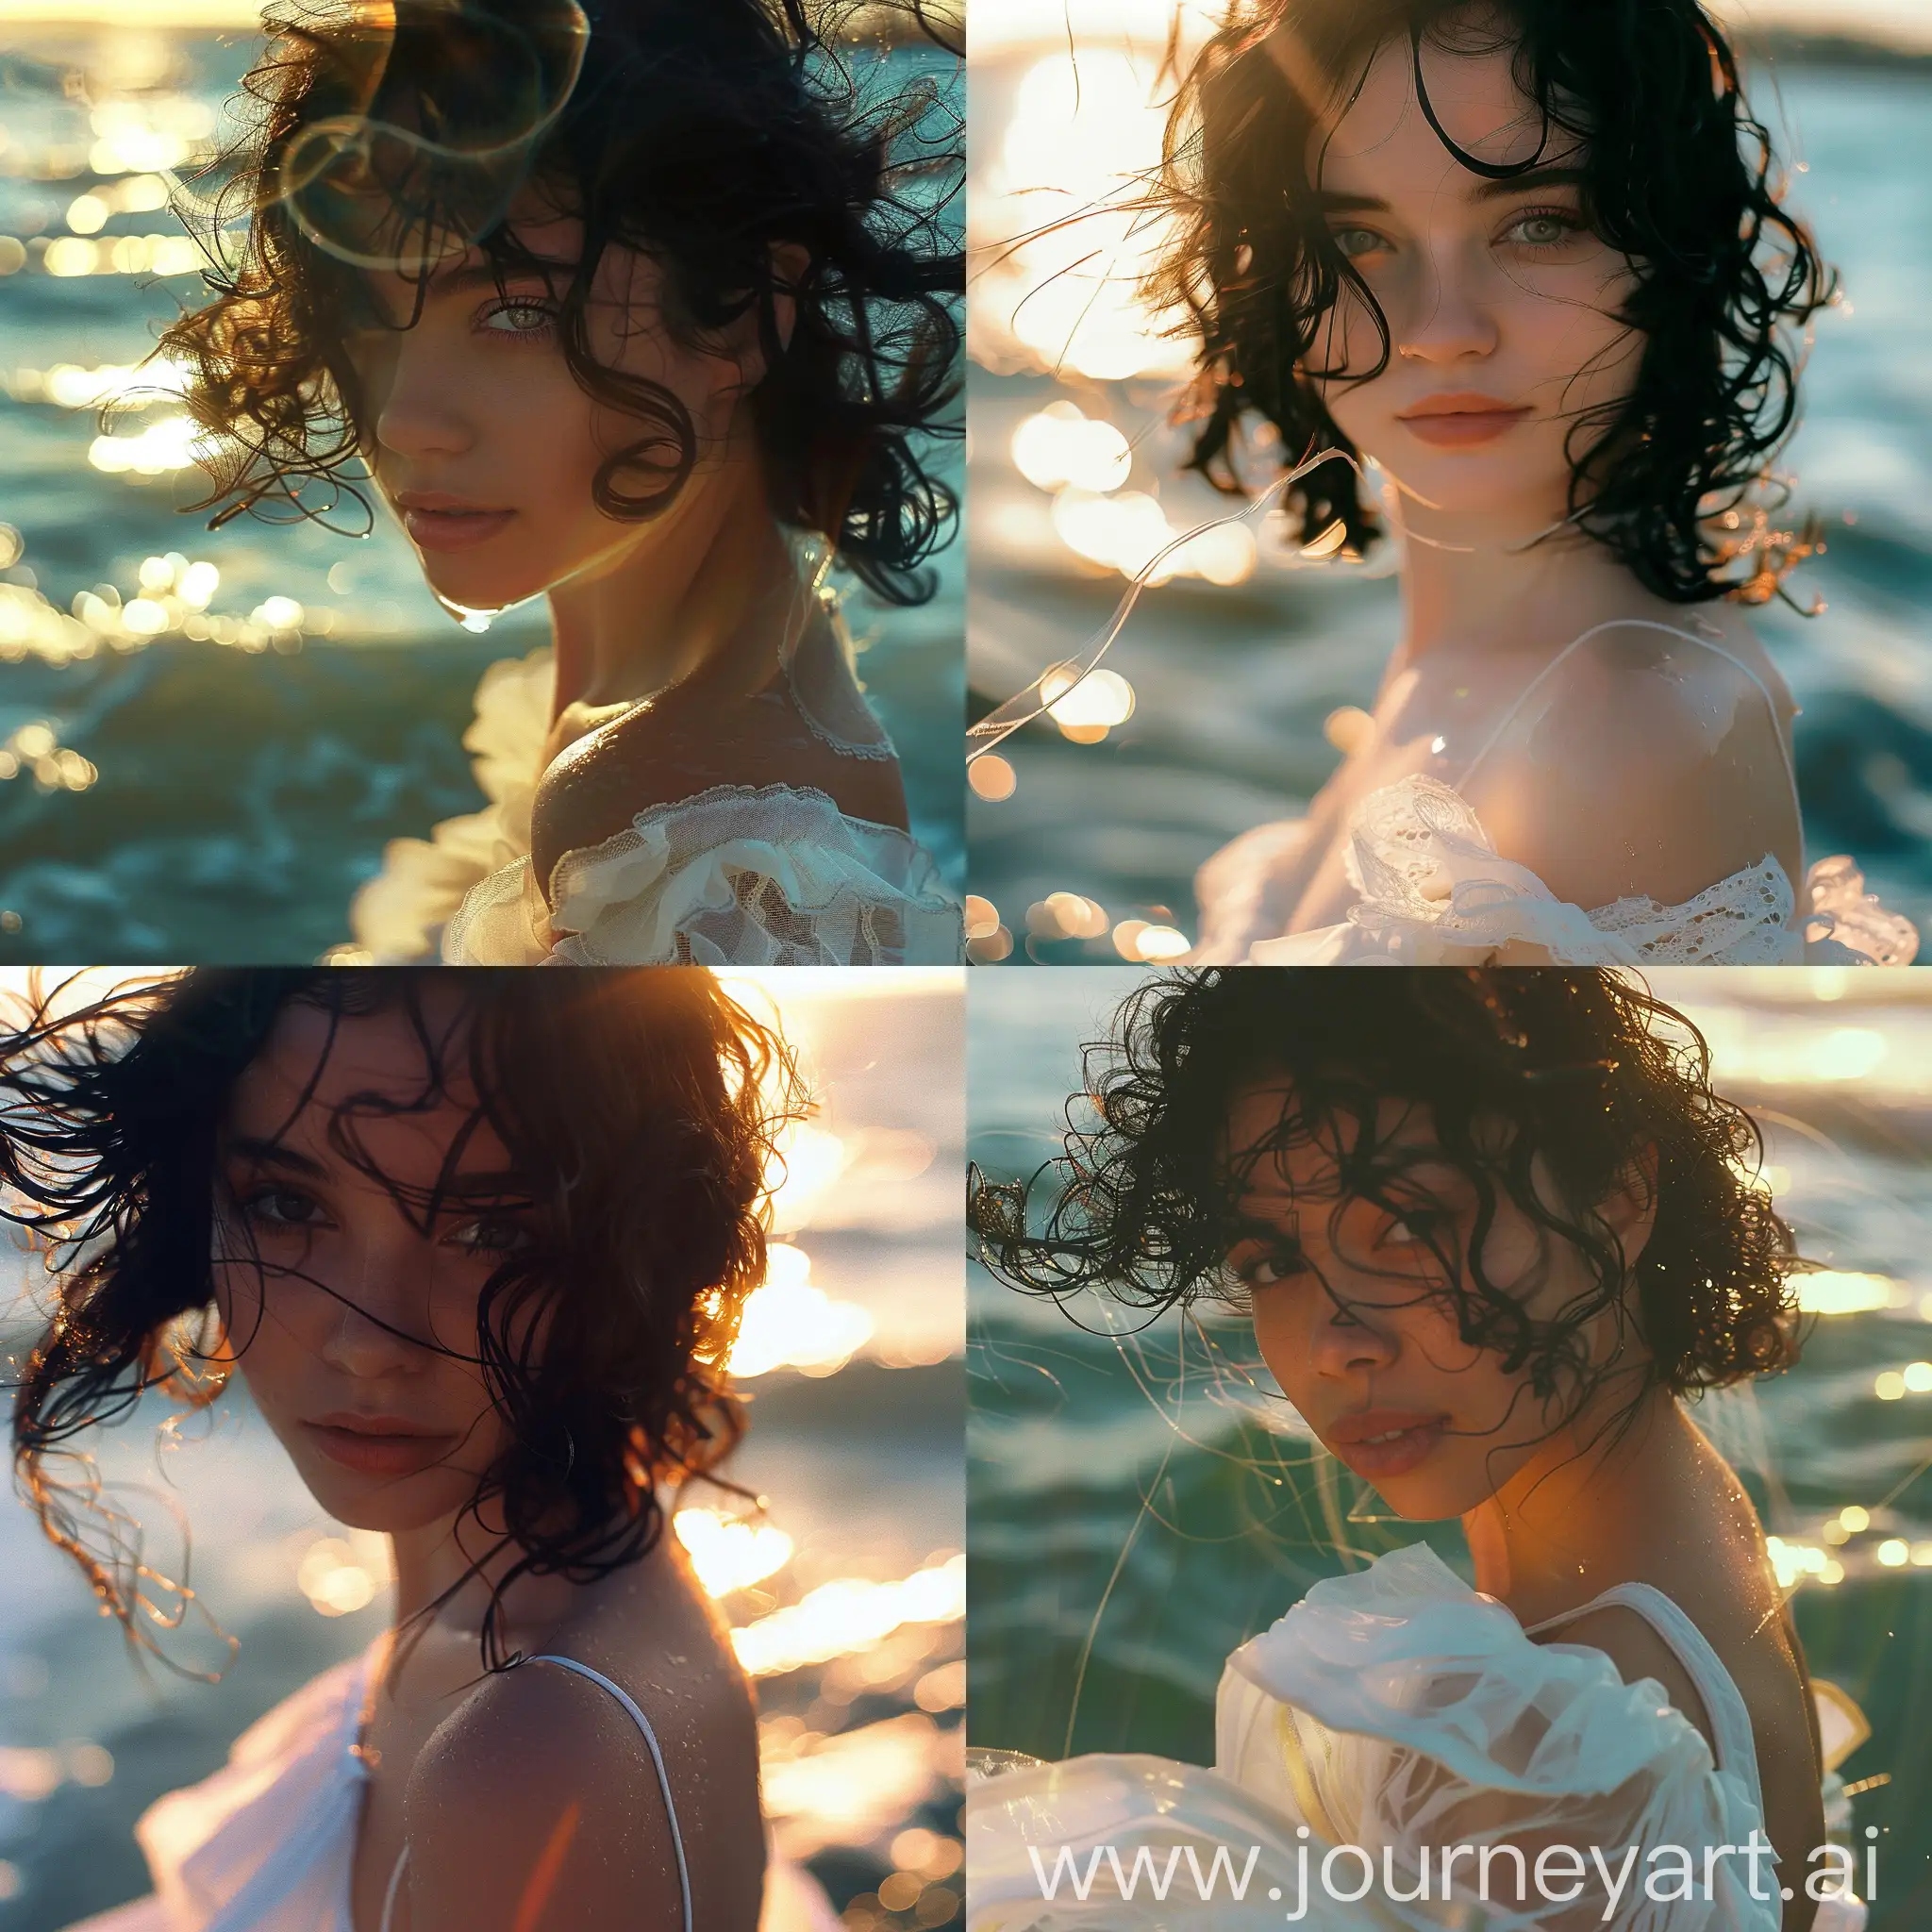 Ethereal-Sunset-Portrait-of-a-Young-Lady-with-Water-Reflection